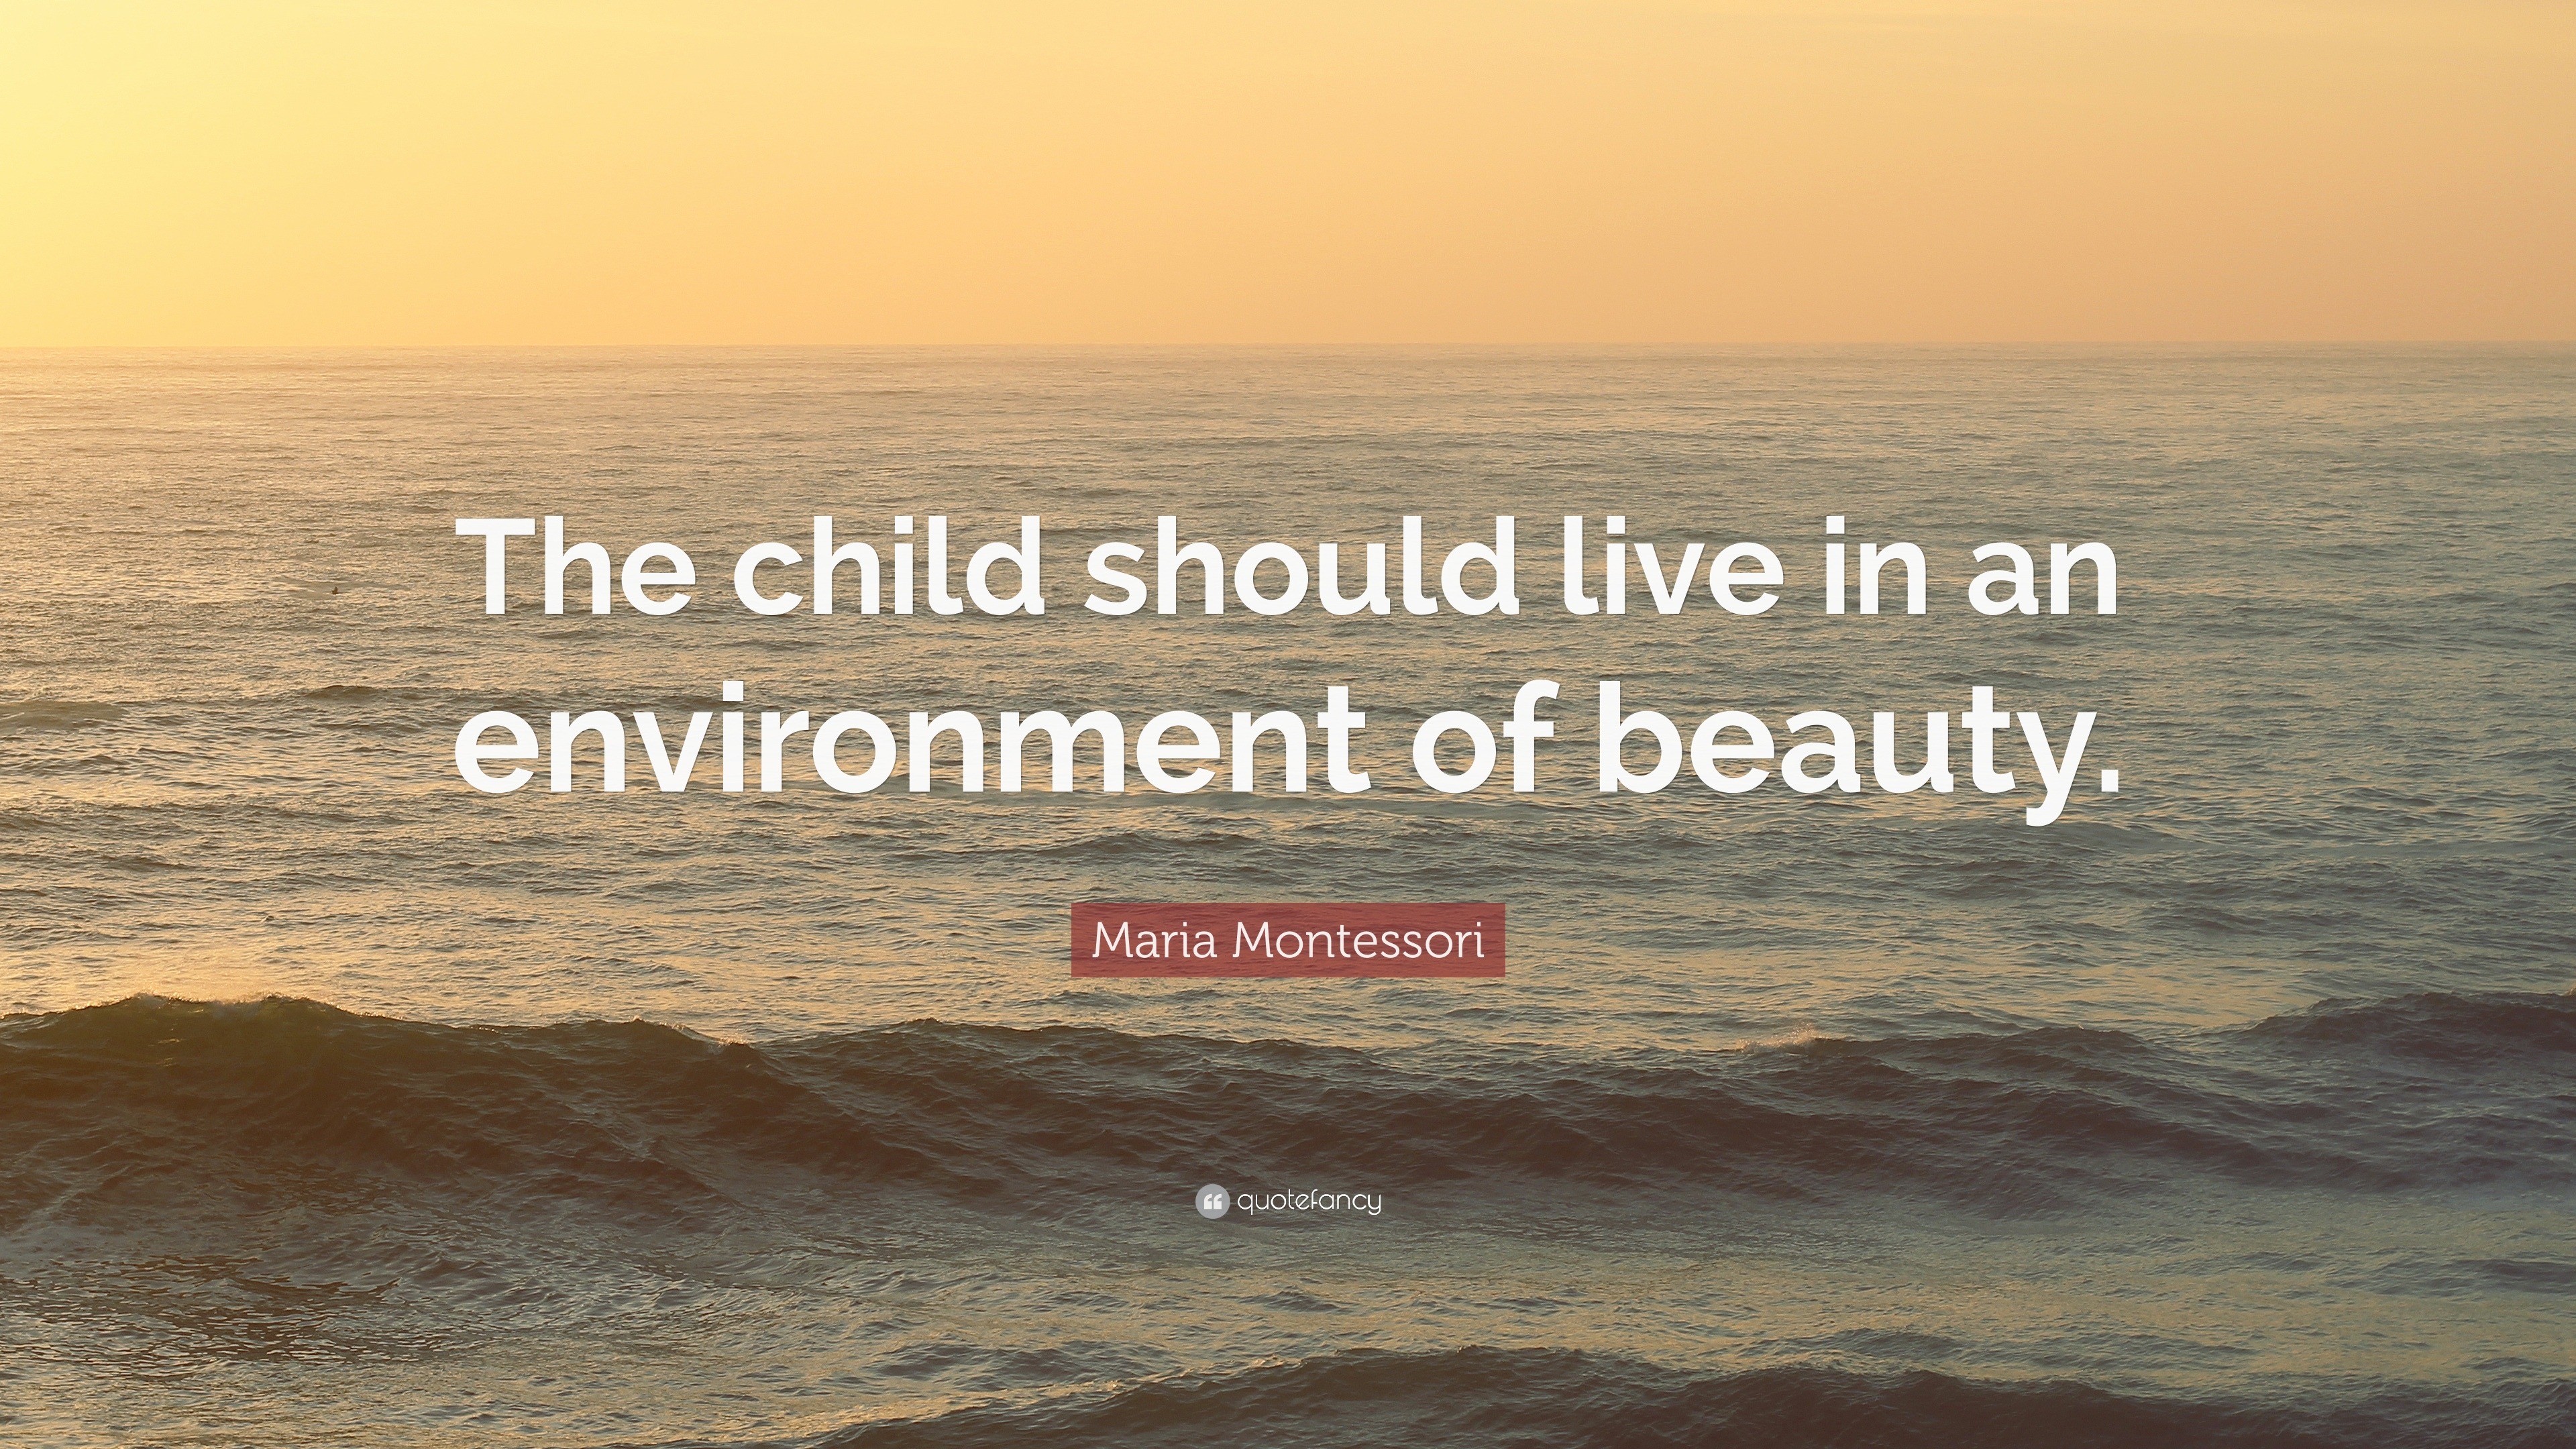 Maria Montessori Quote: “The child should live in an environment of